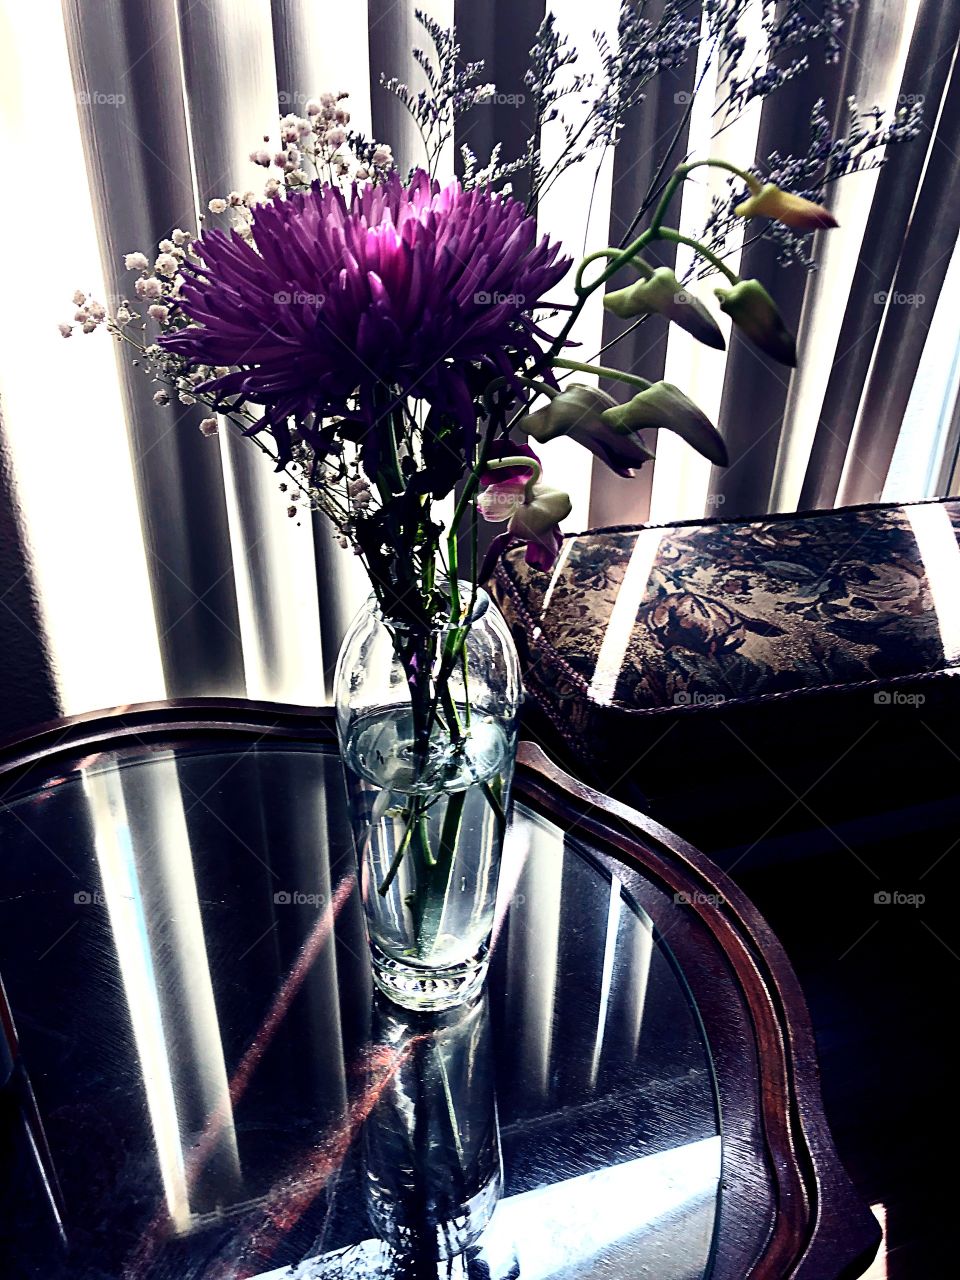 Flowers in a glass vase with light coming through blinds.